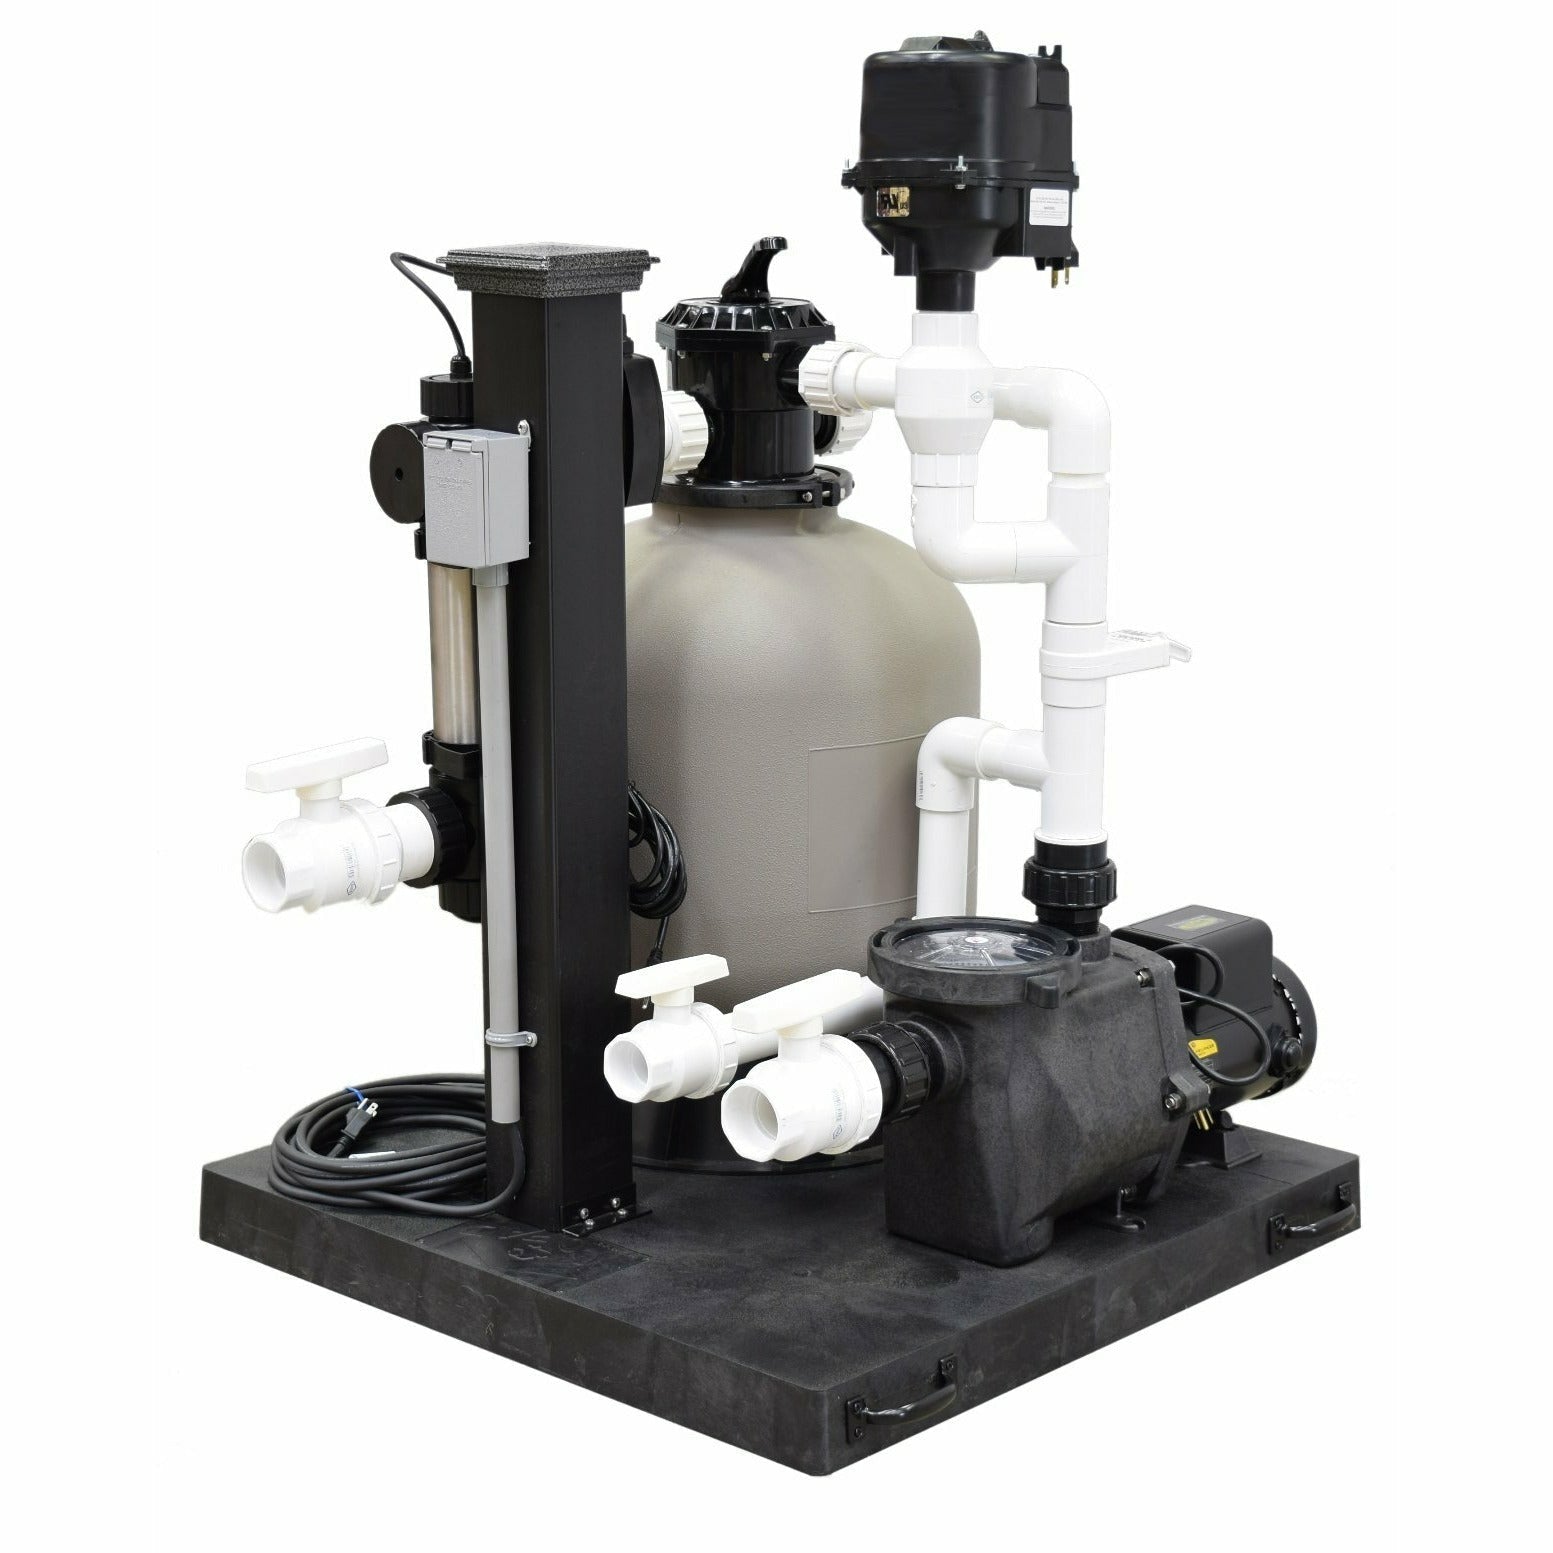 EasyPro Skid Mount Filtration System - Up to 10,000 gal Ponds - American Pond Supplies Easy Pro Bead Filters Bead Filters